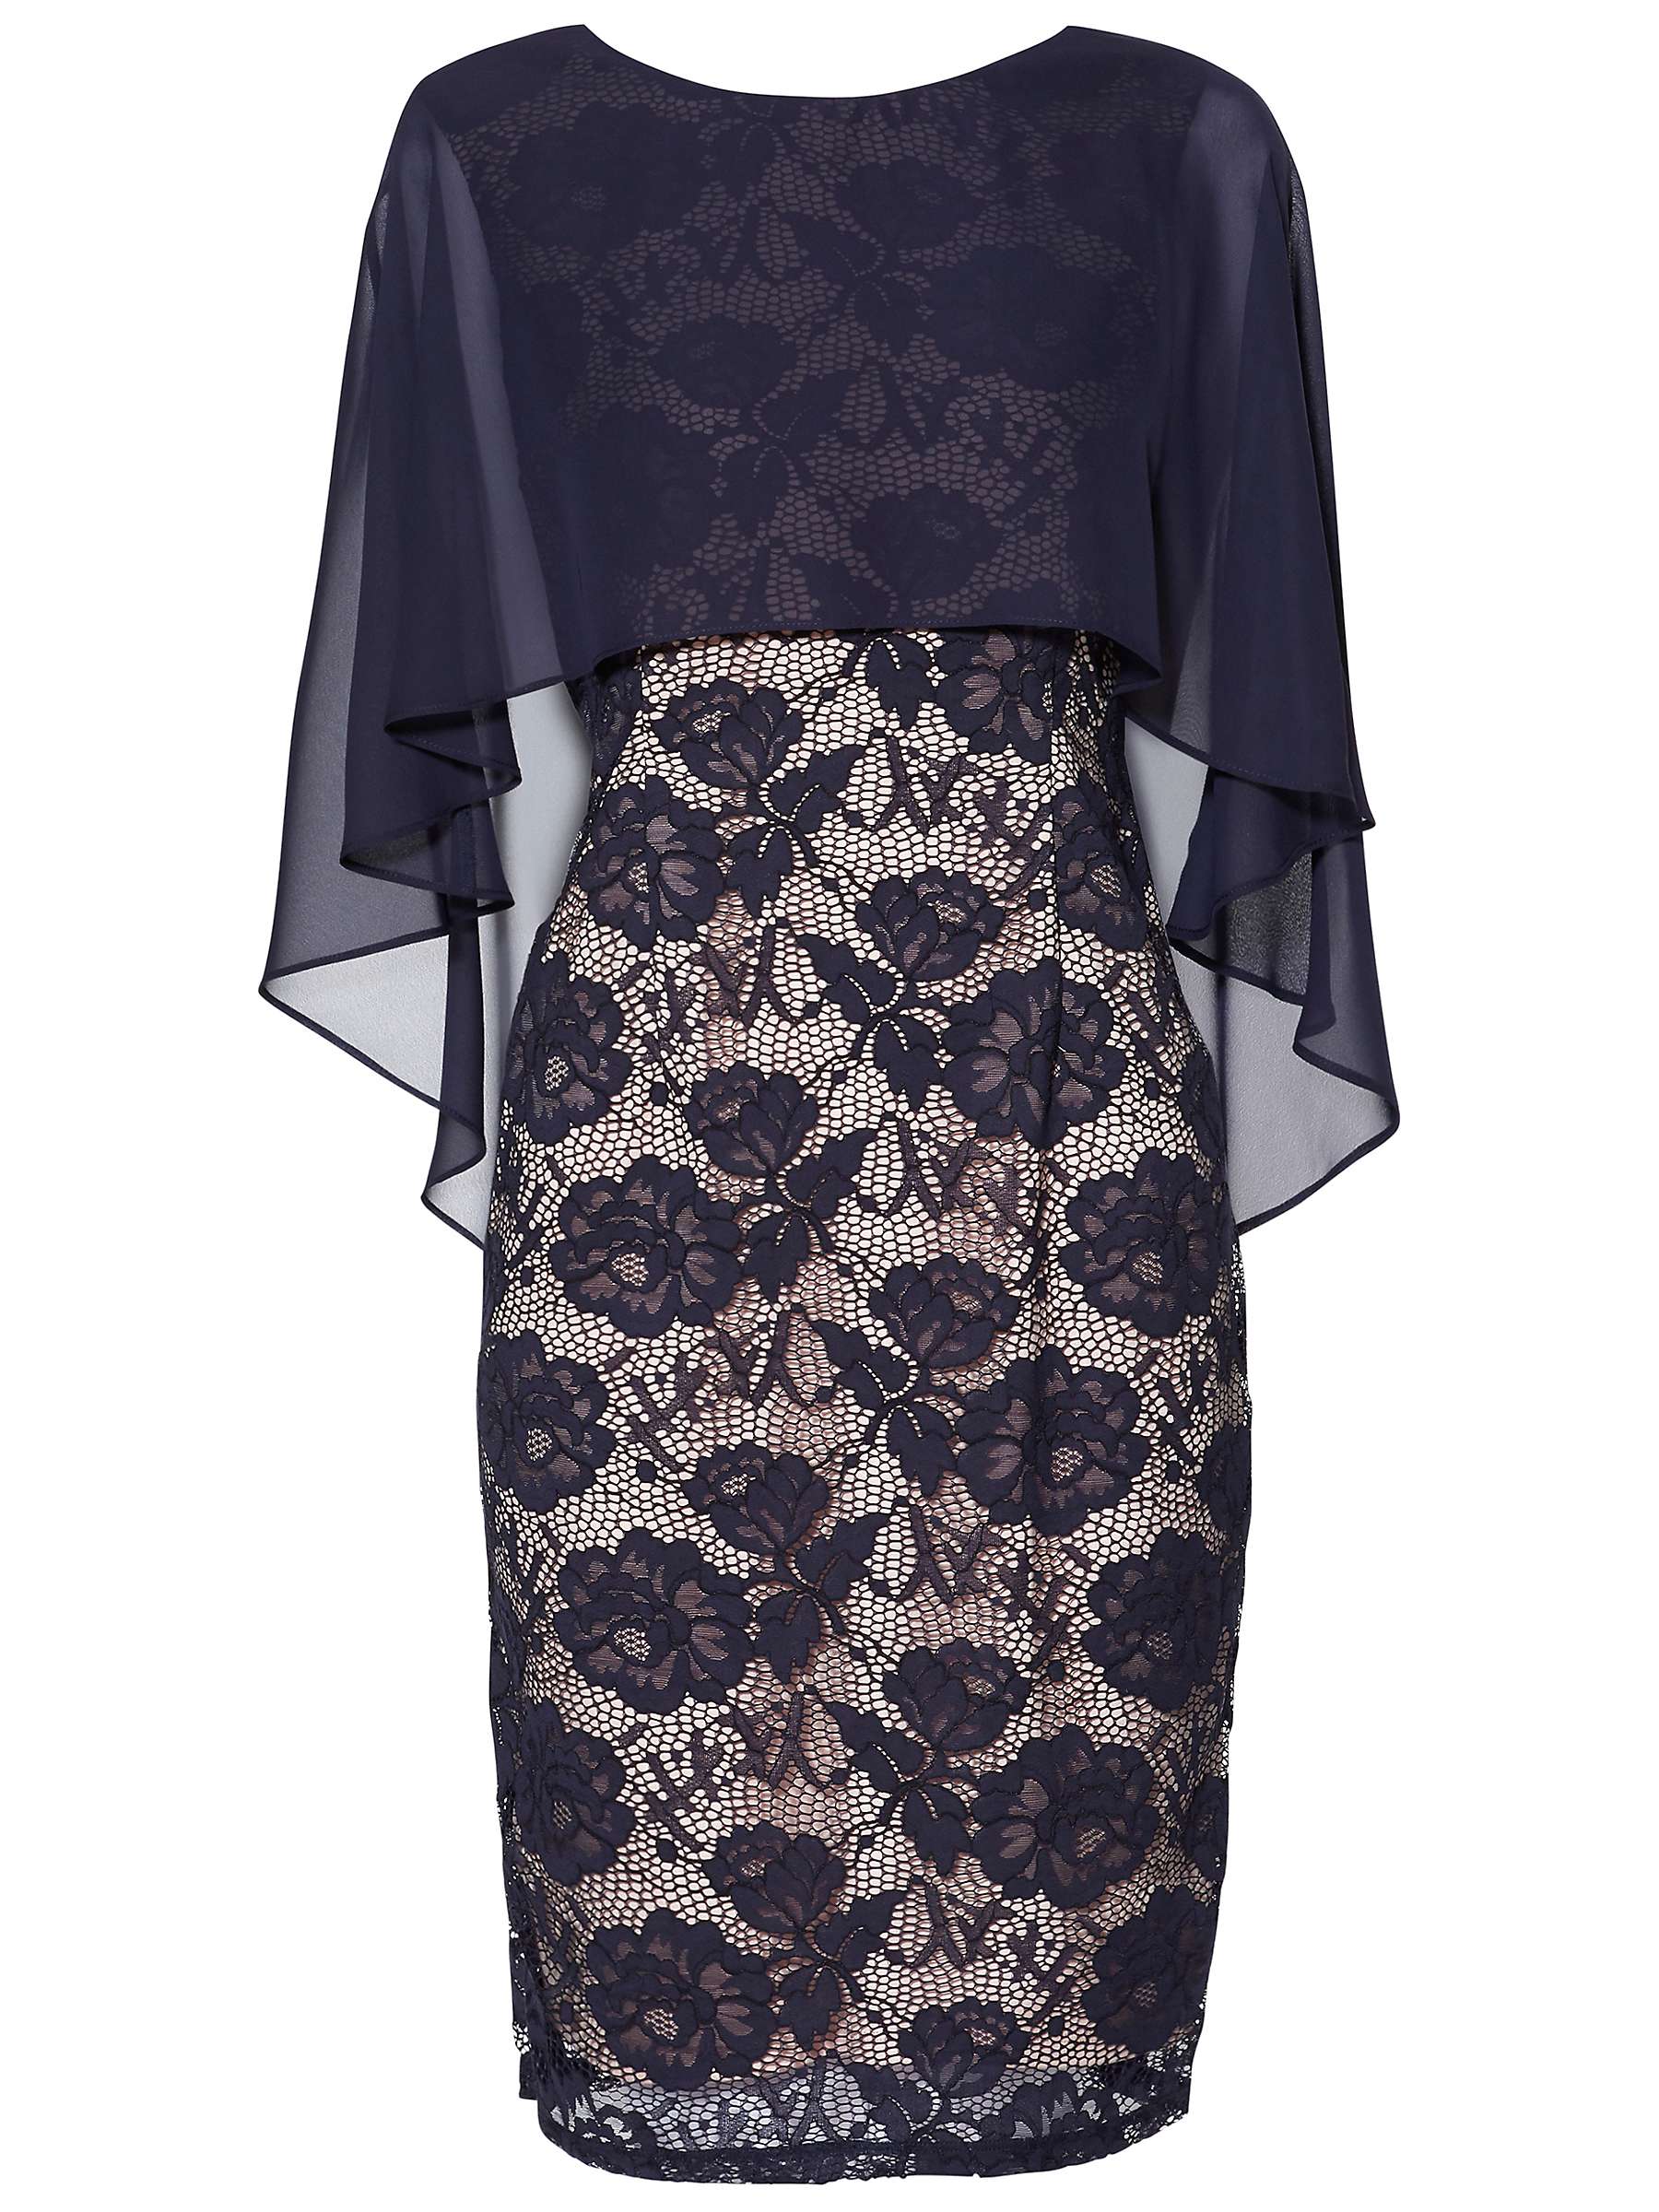 Buy Gina Bacconi Minnie Floral Embroidery Dress, Navy Online at johnlewis.com